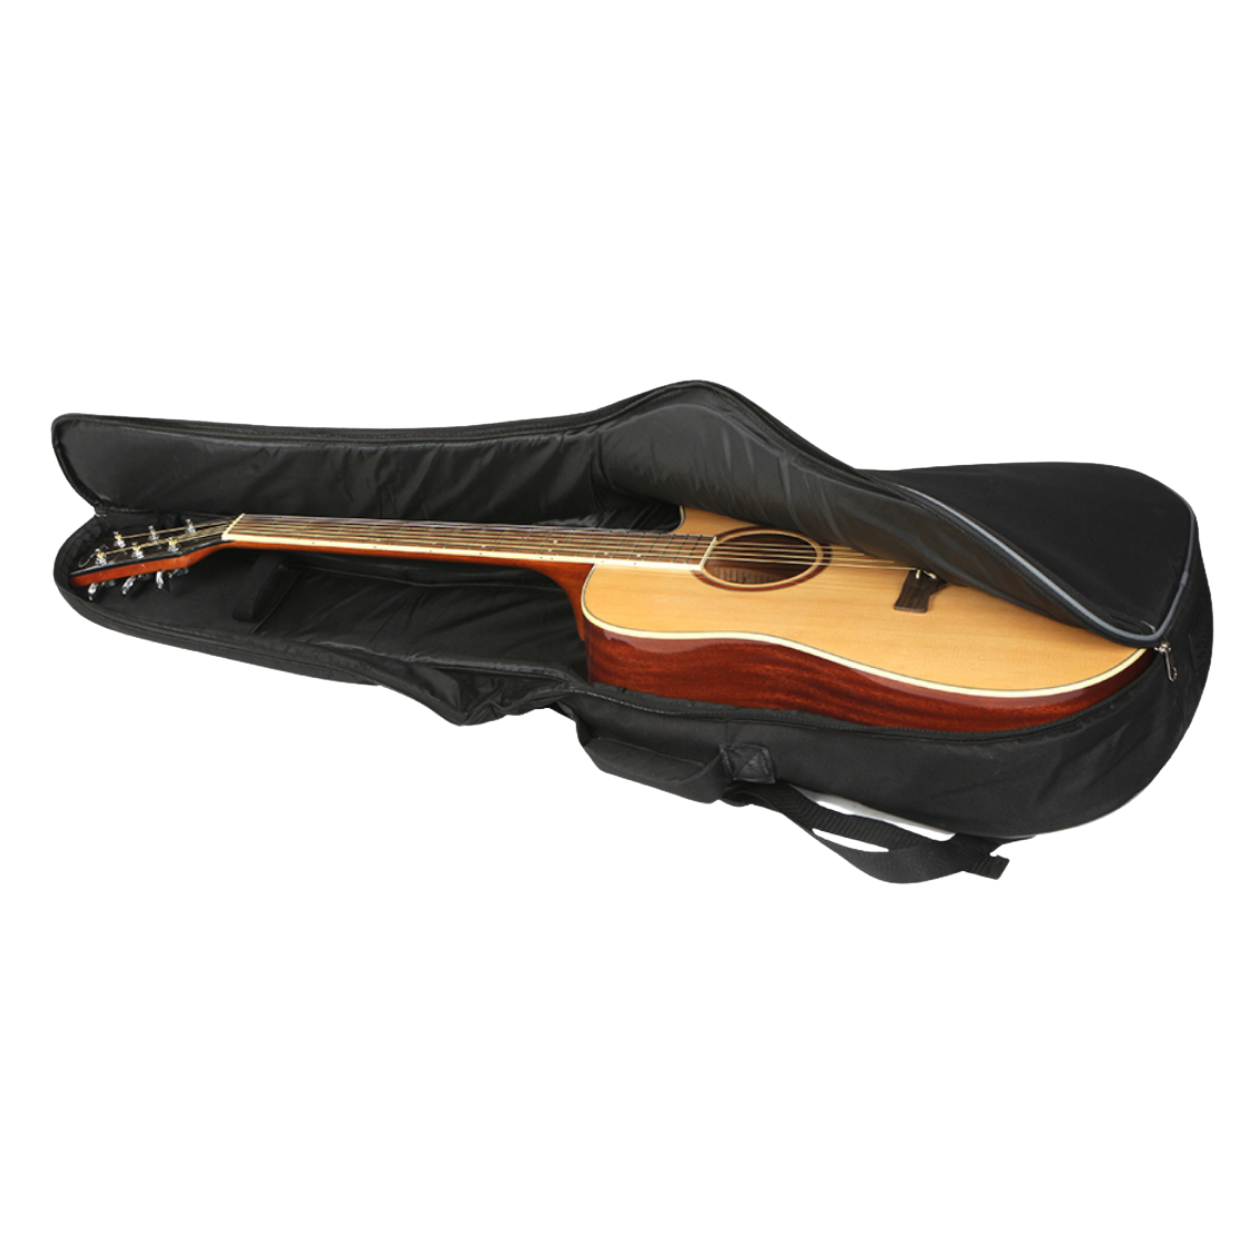 NEOWOOD B41-B9 ACOUSTIC GUITAR BAG, NEOWOOD, CASES & GIG BAGS, neowood-cases-gig-bags-neo-b41-b9, ZOSO MUSIC SDN BHD